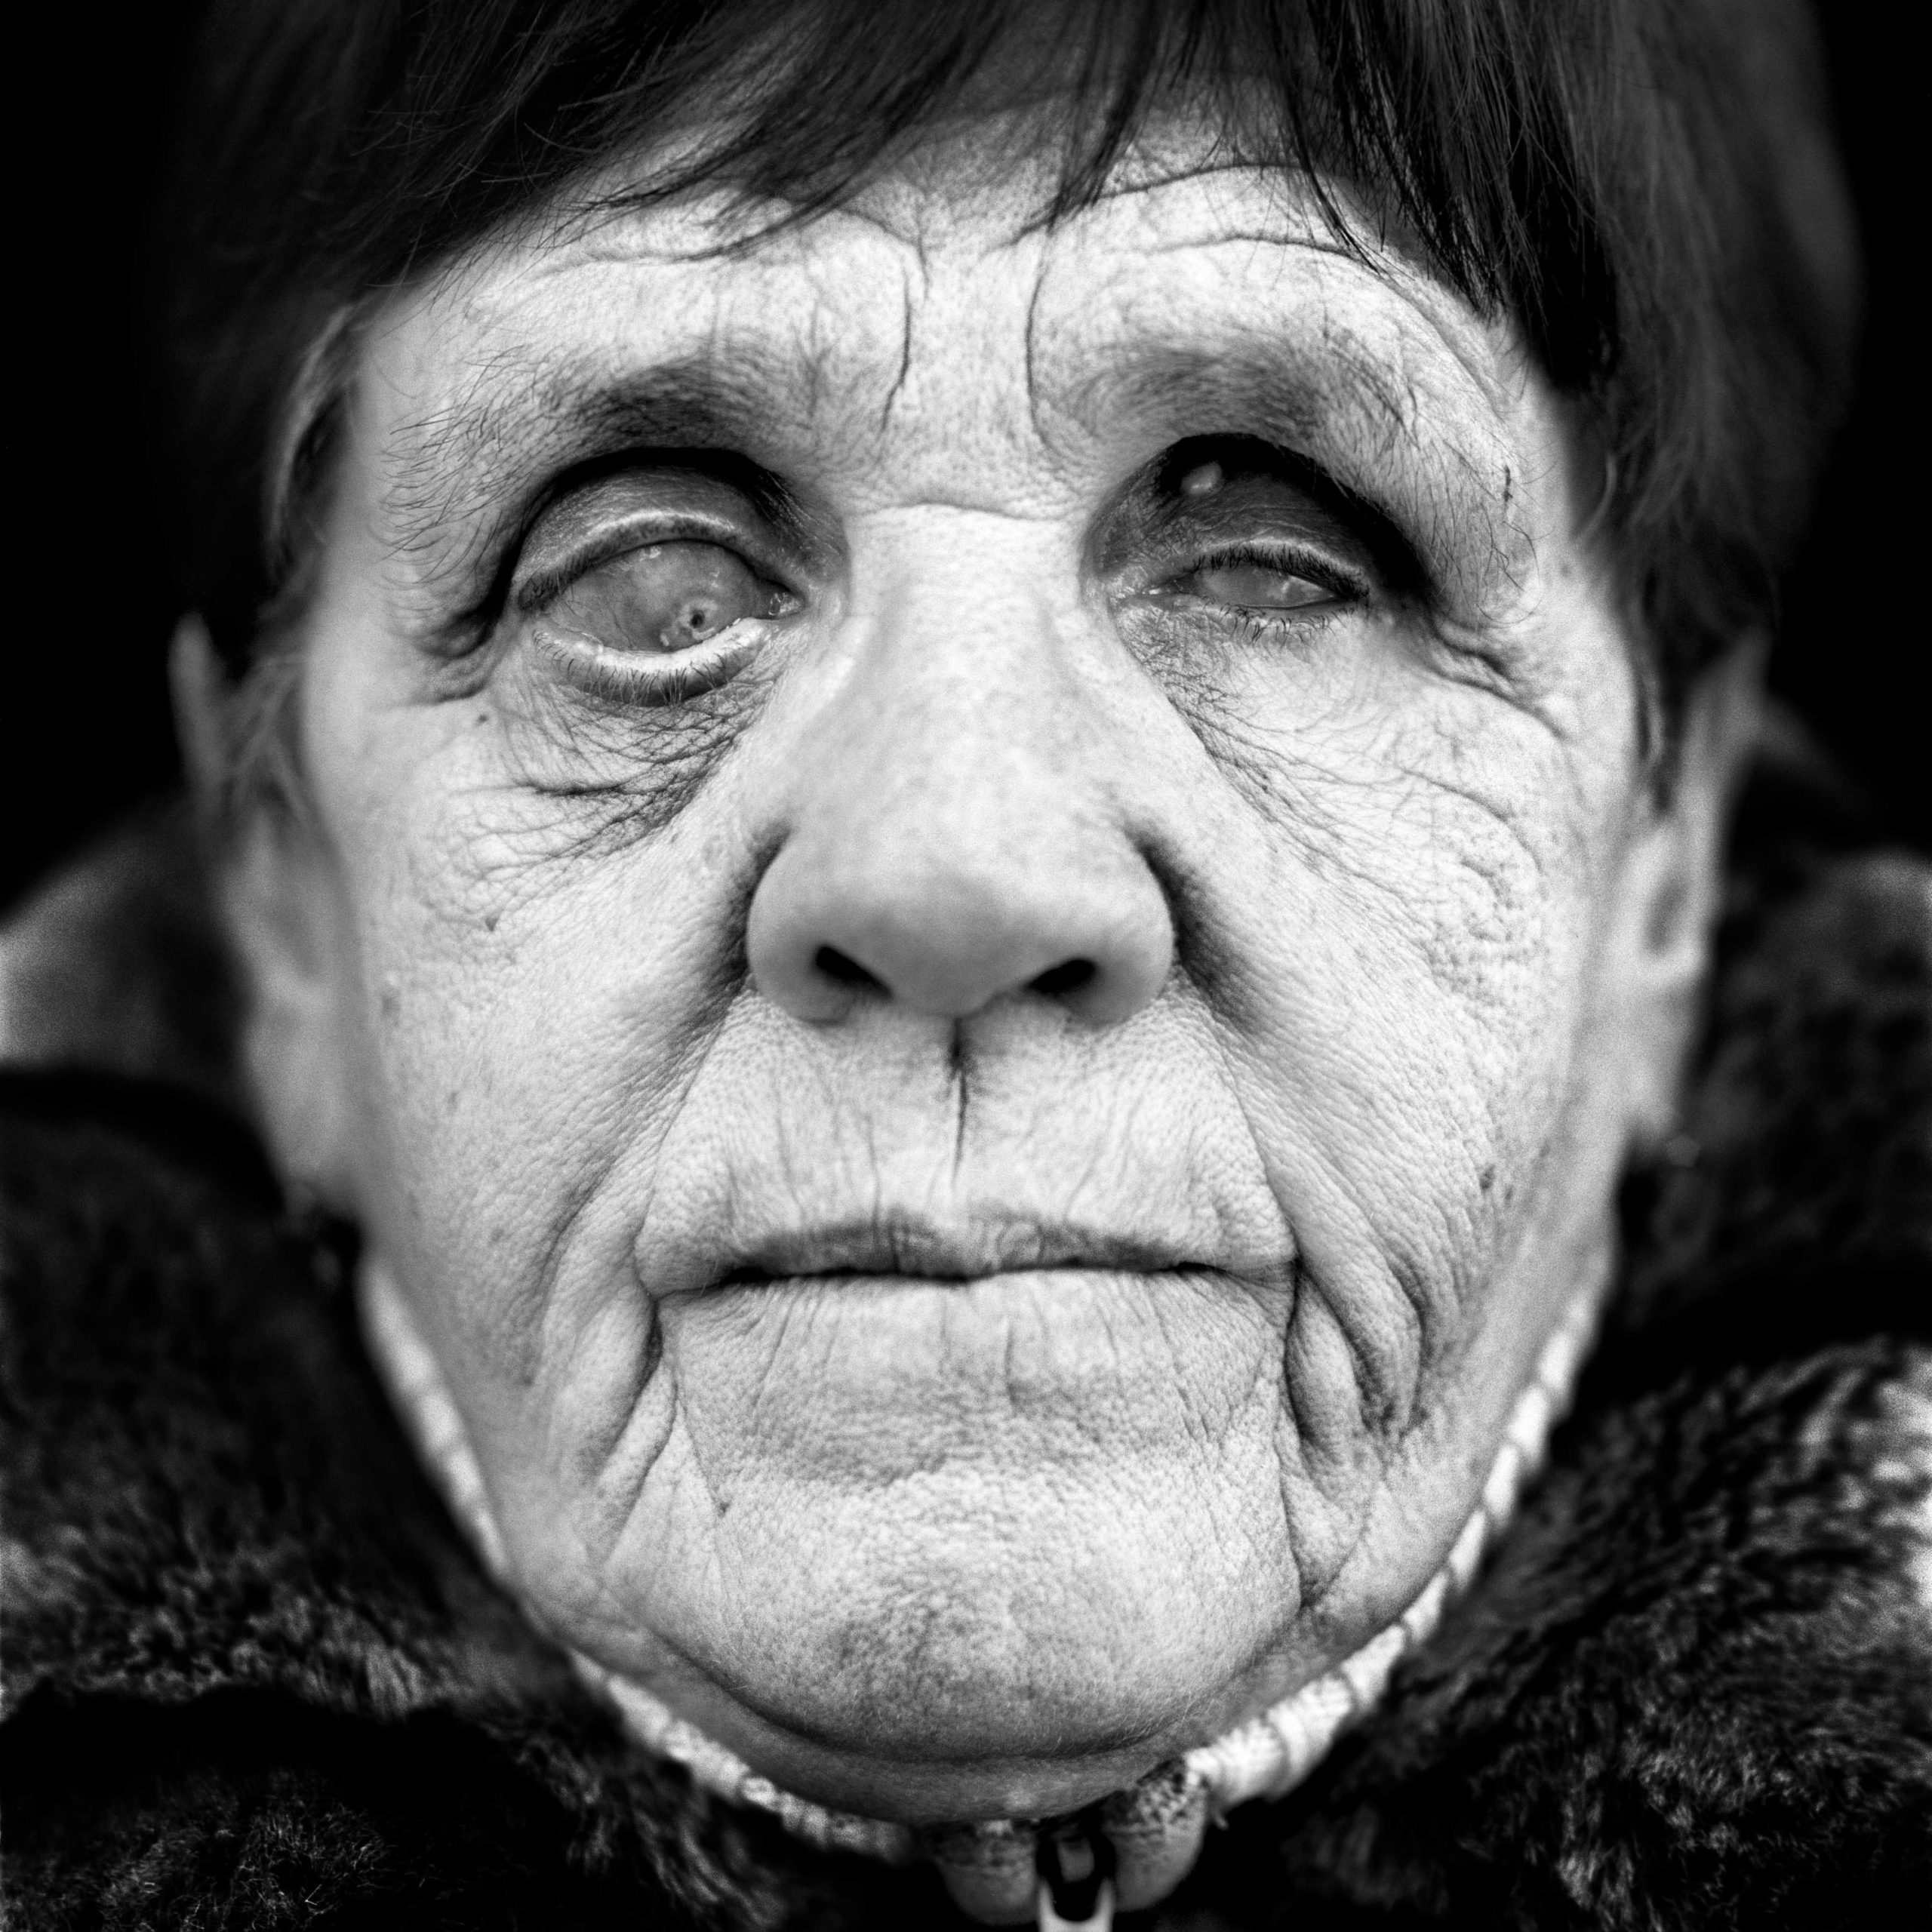 Elena Griczienko (USSR, 1939). Interview outtake: “We sat together with the cattle in a train carriage. There was hardly anything to eat, and I was ill. I had symptoms of frostbite in my legs and then in my eyes. I was blind by the spring. “